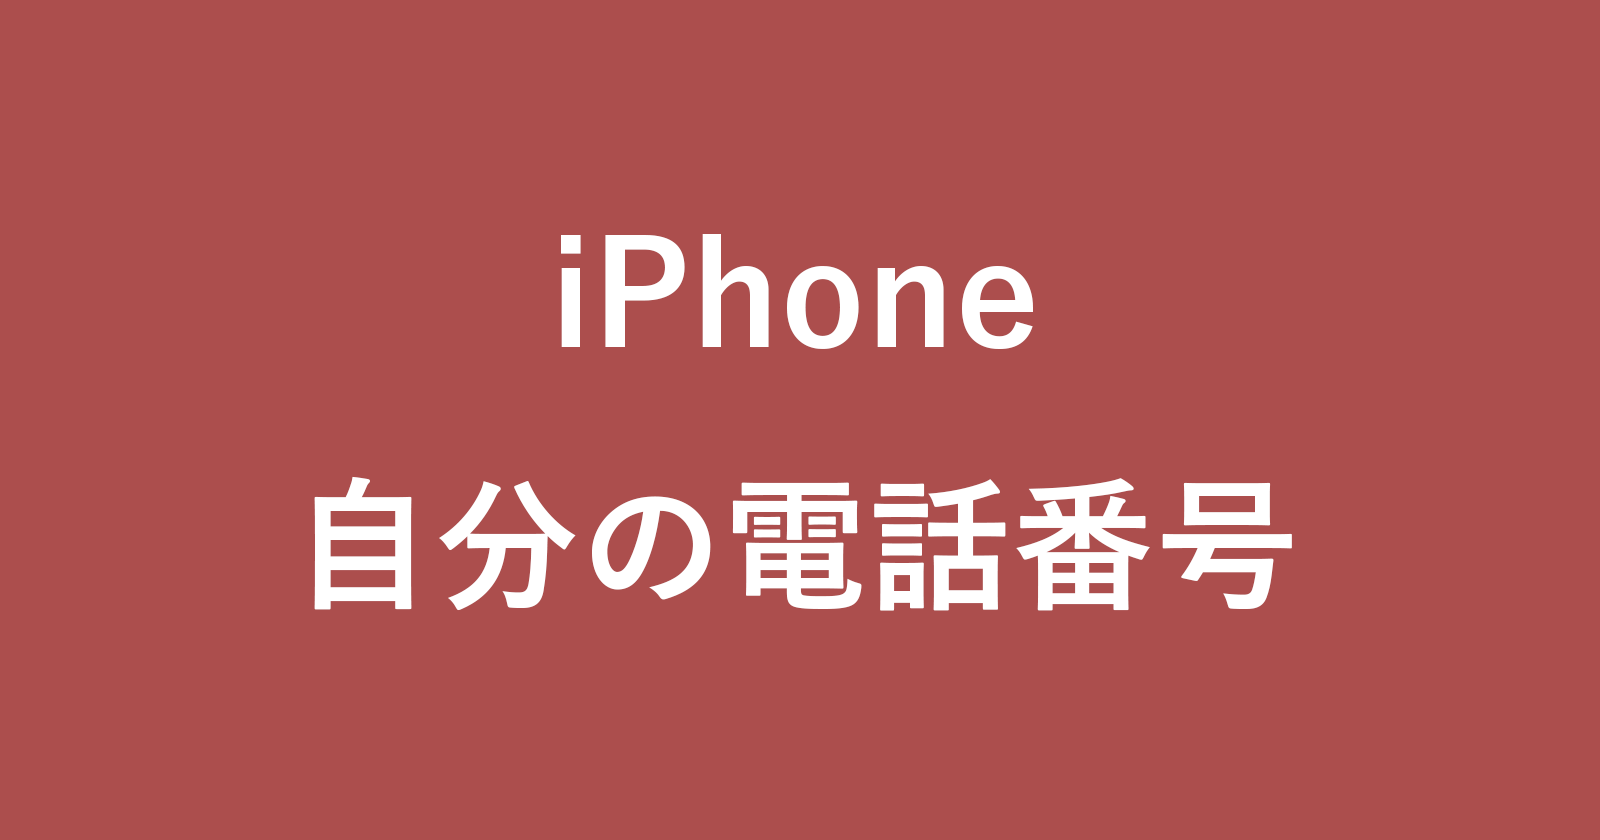 iphone mobile phone number